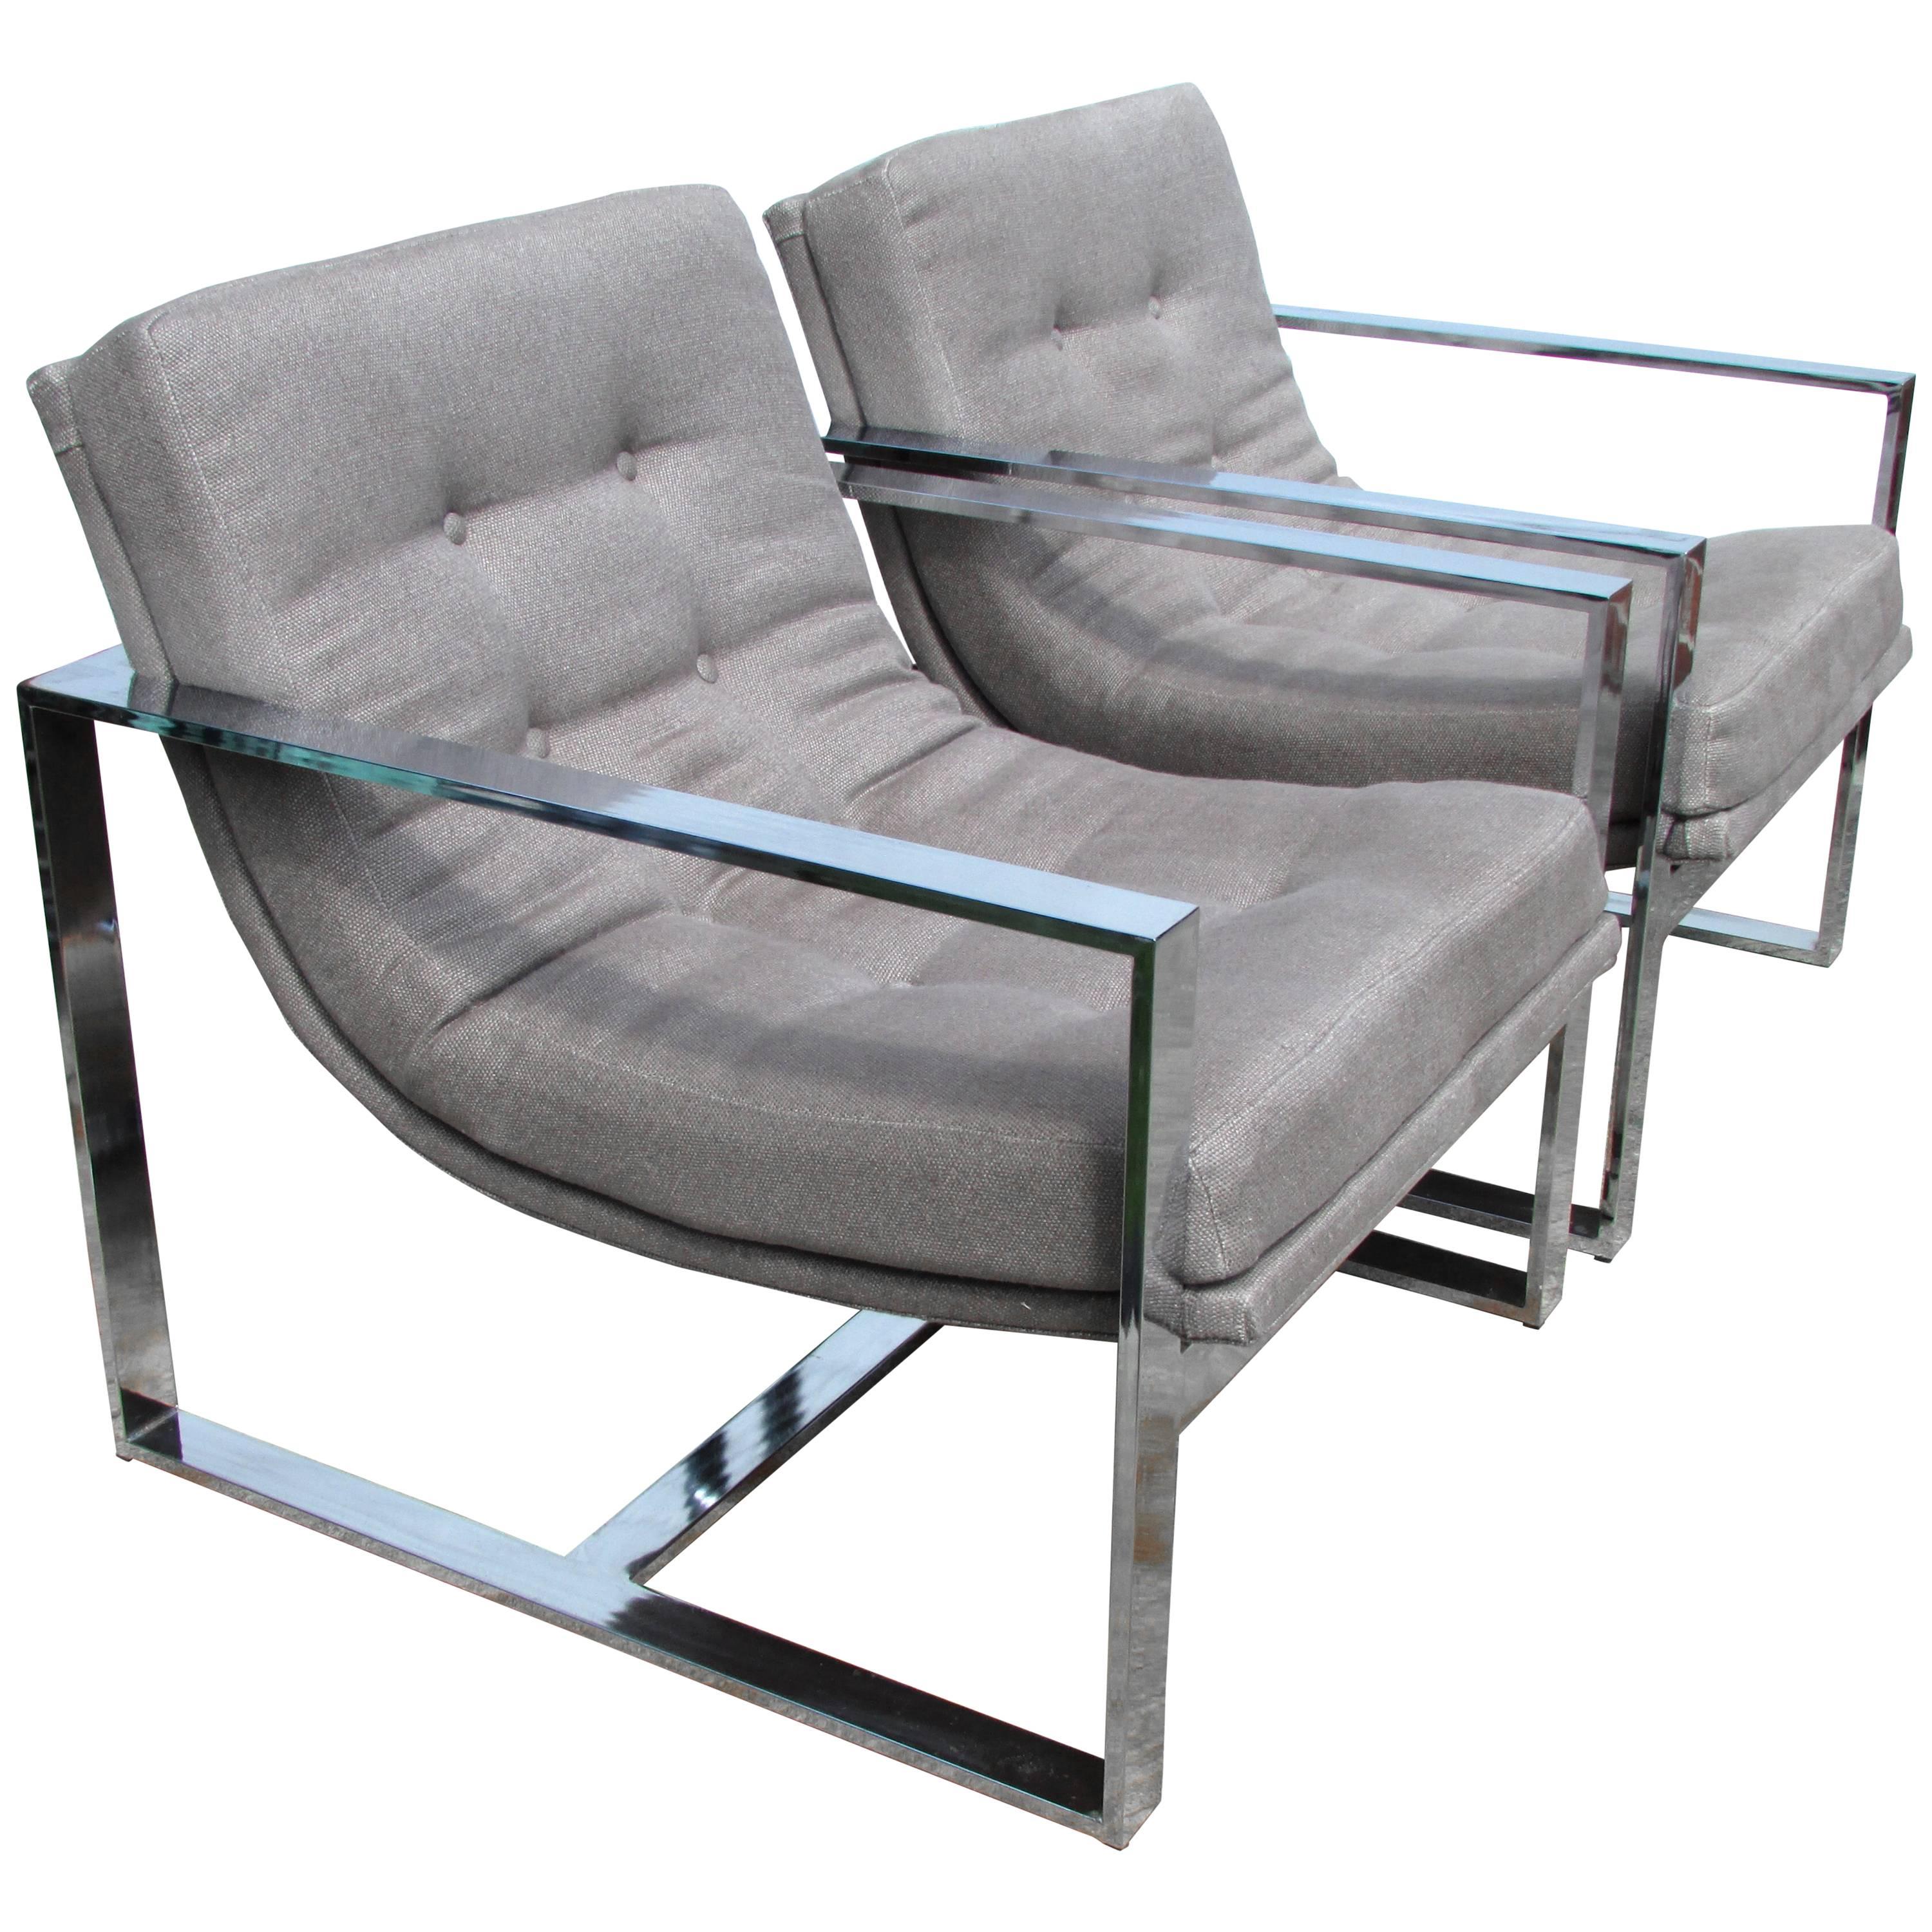 Pair of Milo Baughman Cube Chairs For Sale